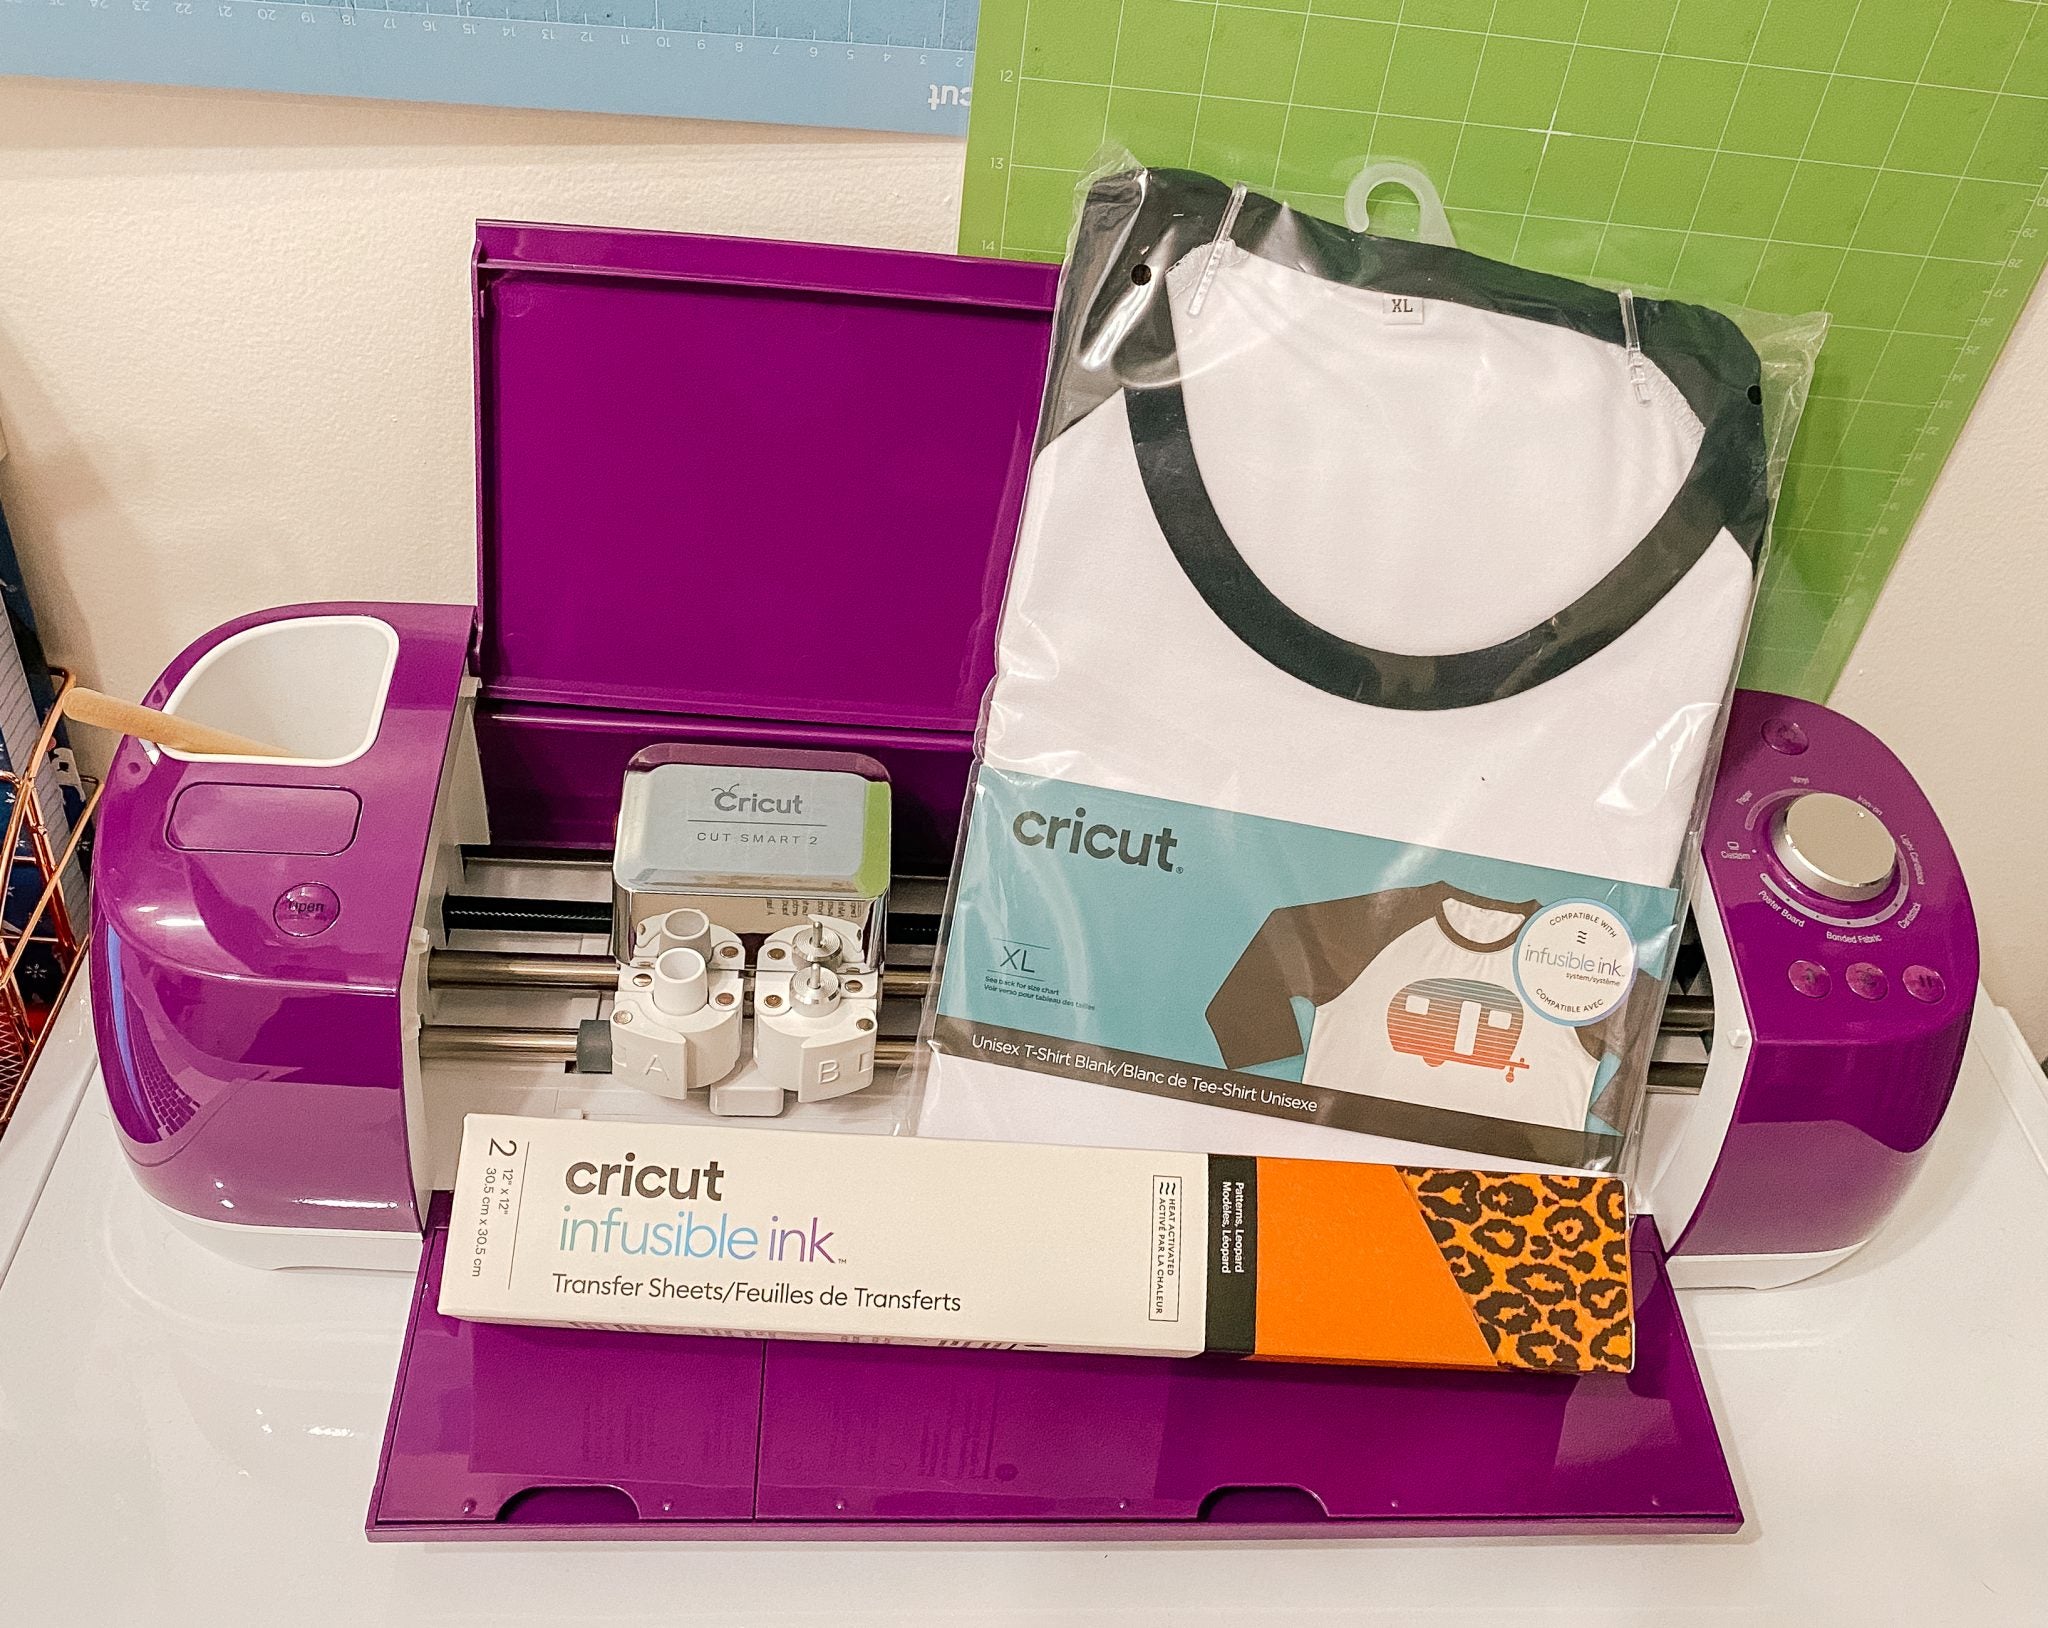 All About the New Cricut® Infusible Ink™ - Sew Woodsy